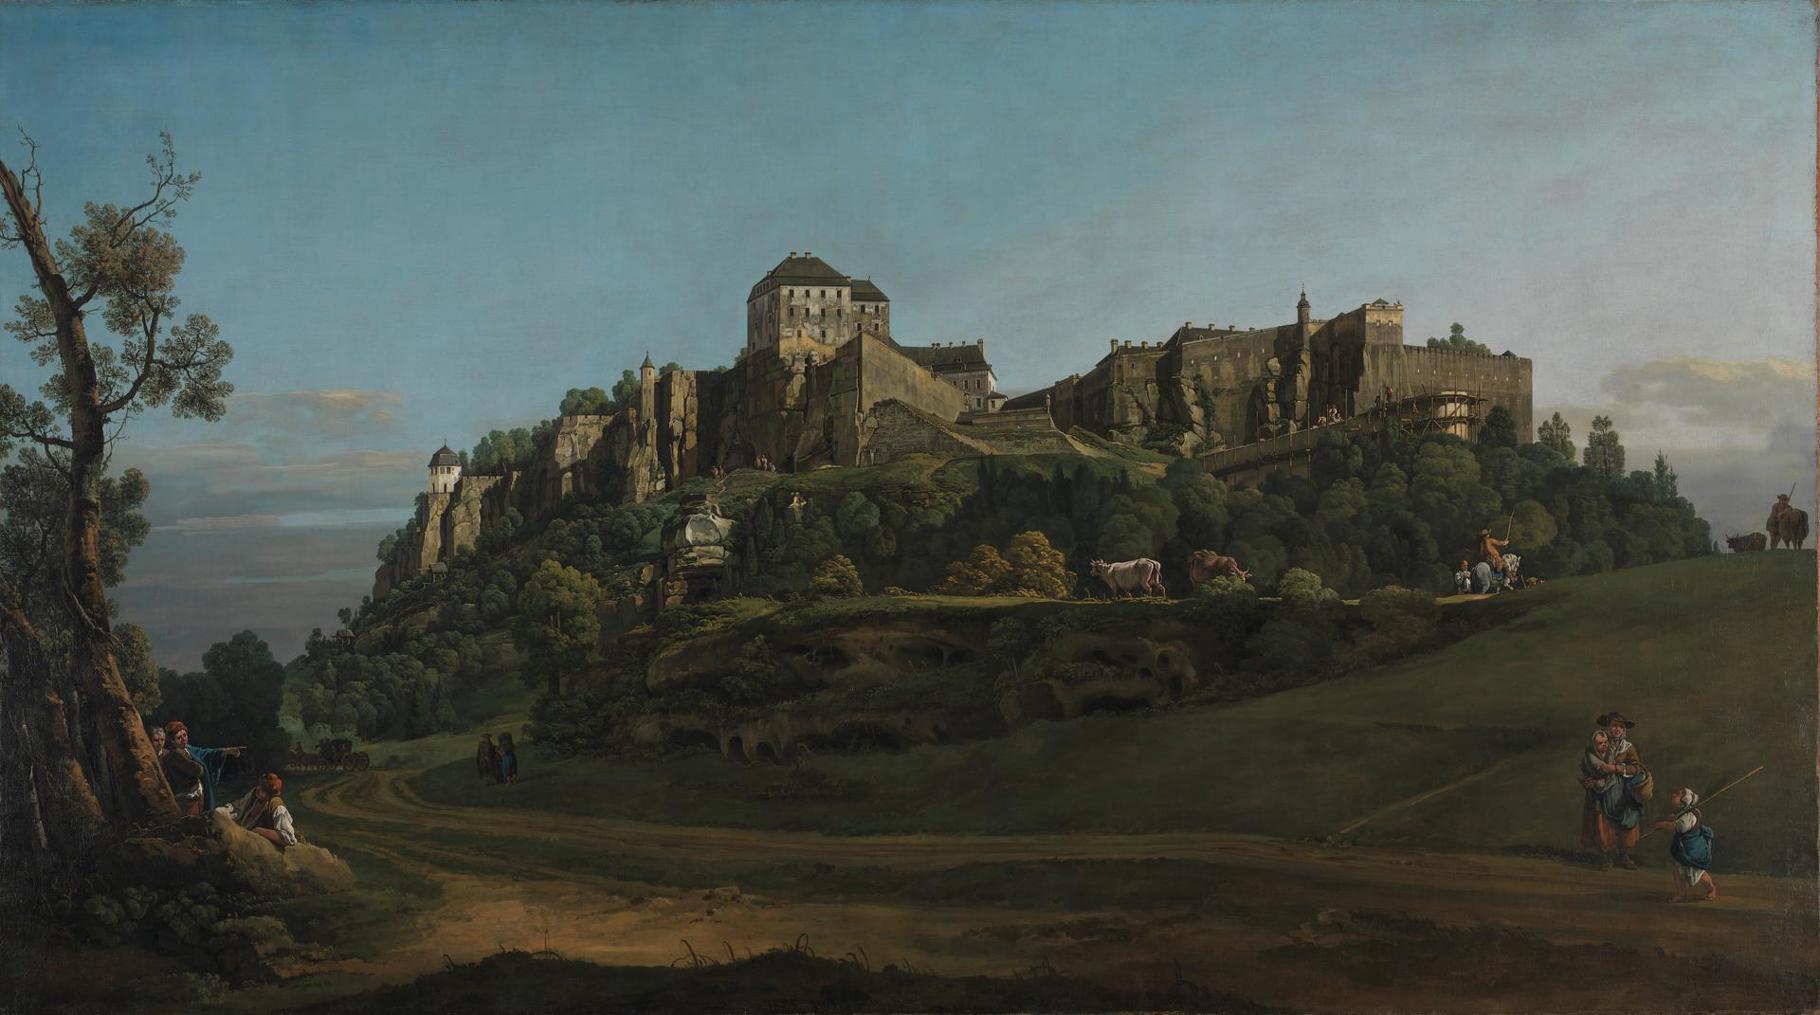 Castles: Paintings from the National Gallery, London, Press releases